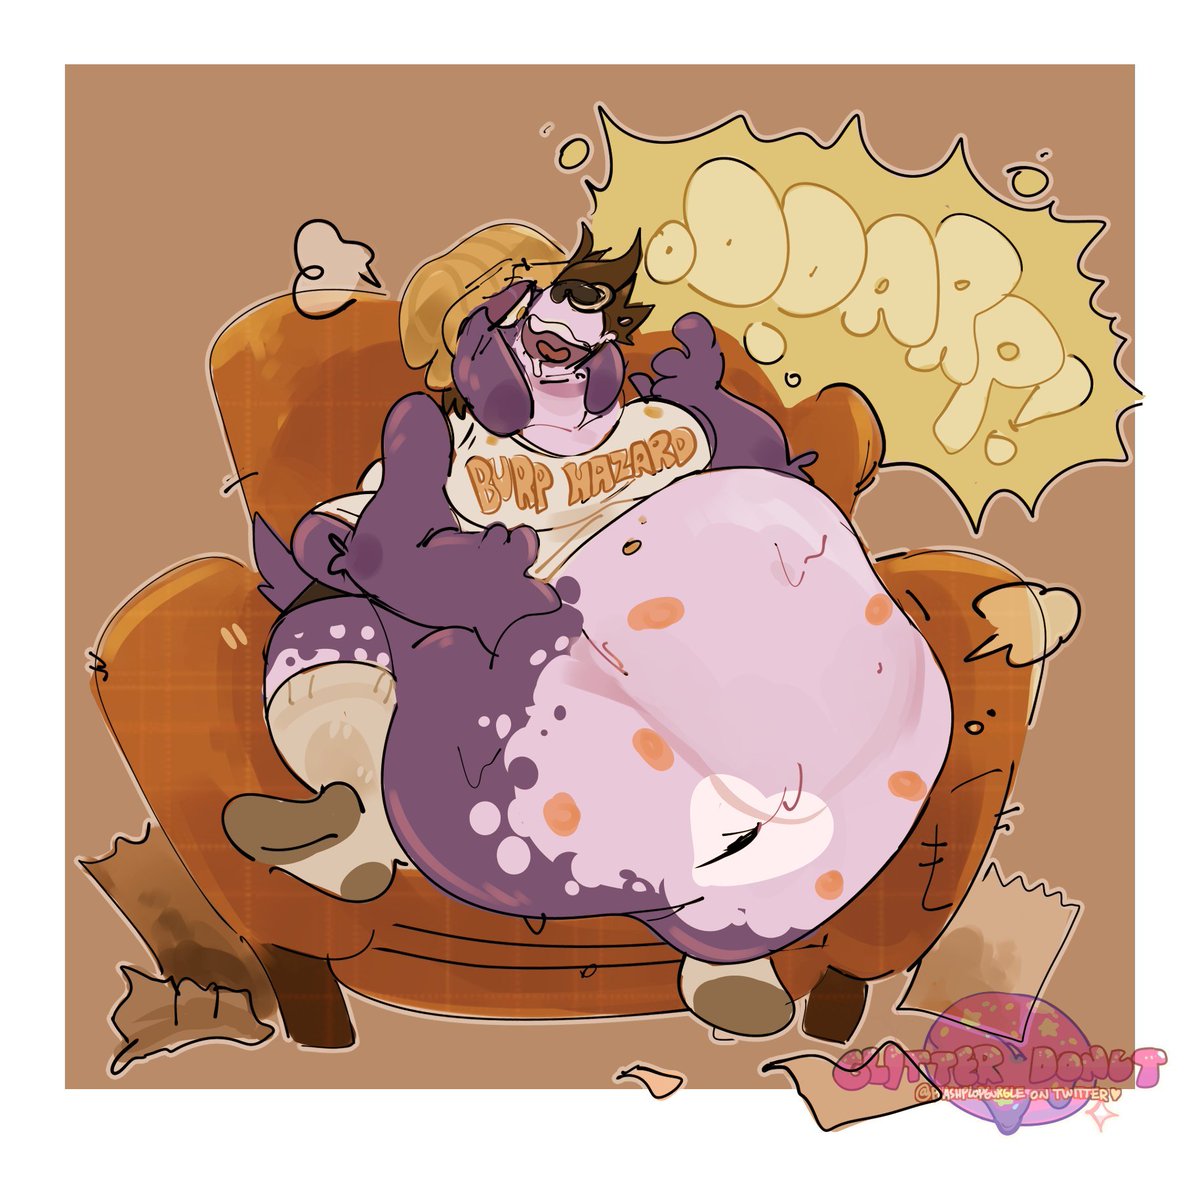 it's a crime i didn't post this piece for @porkbuttz earlier thats MY BAD............ fat dog hours are forever